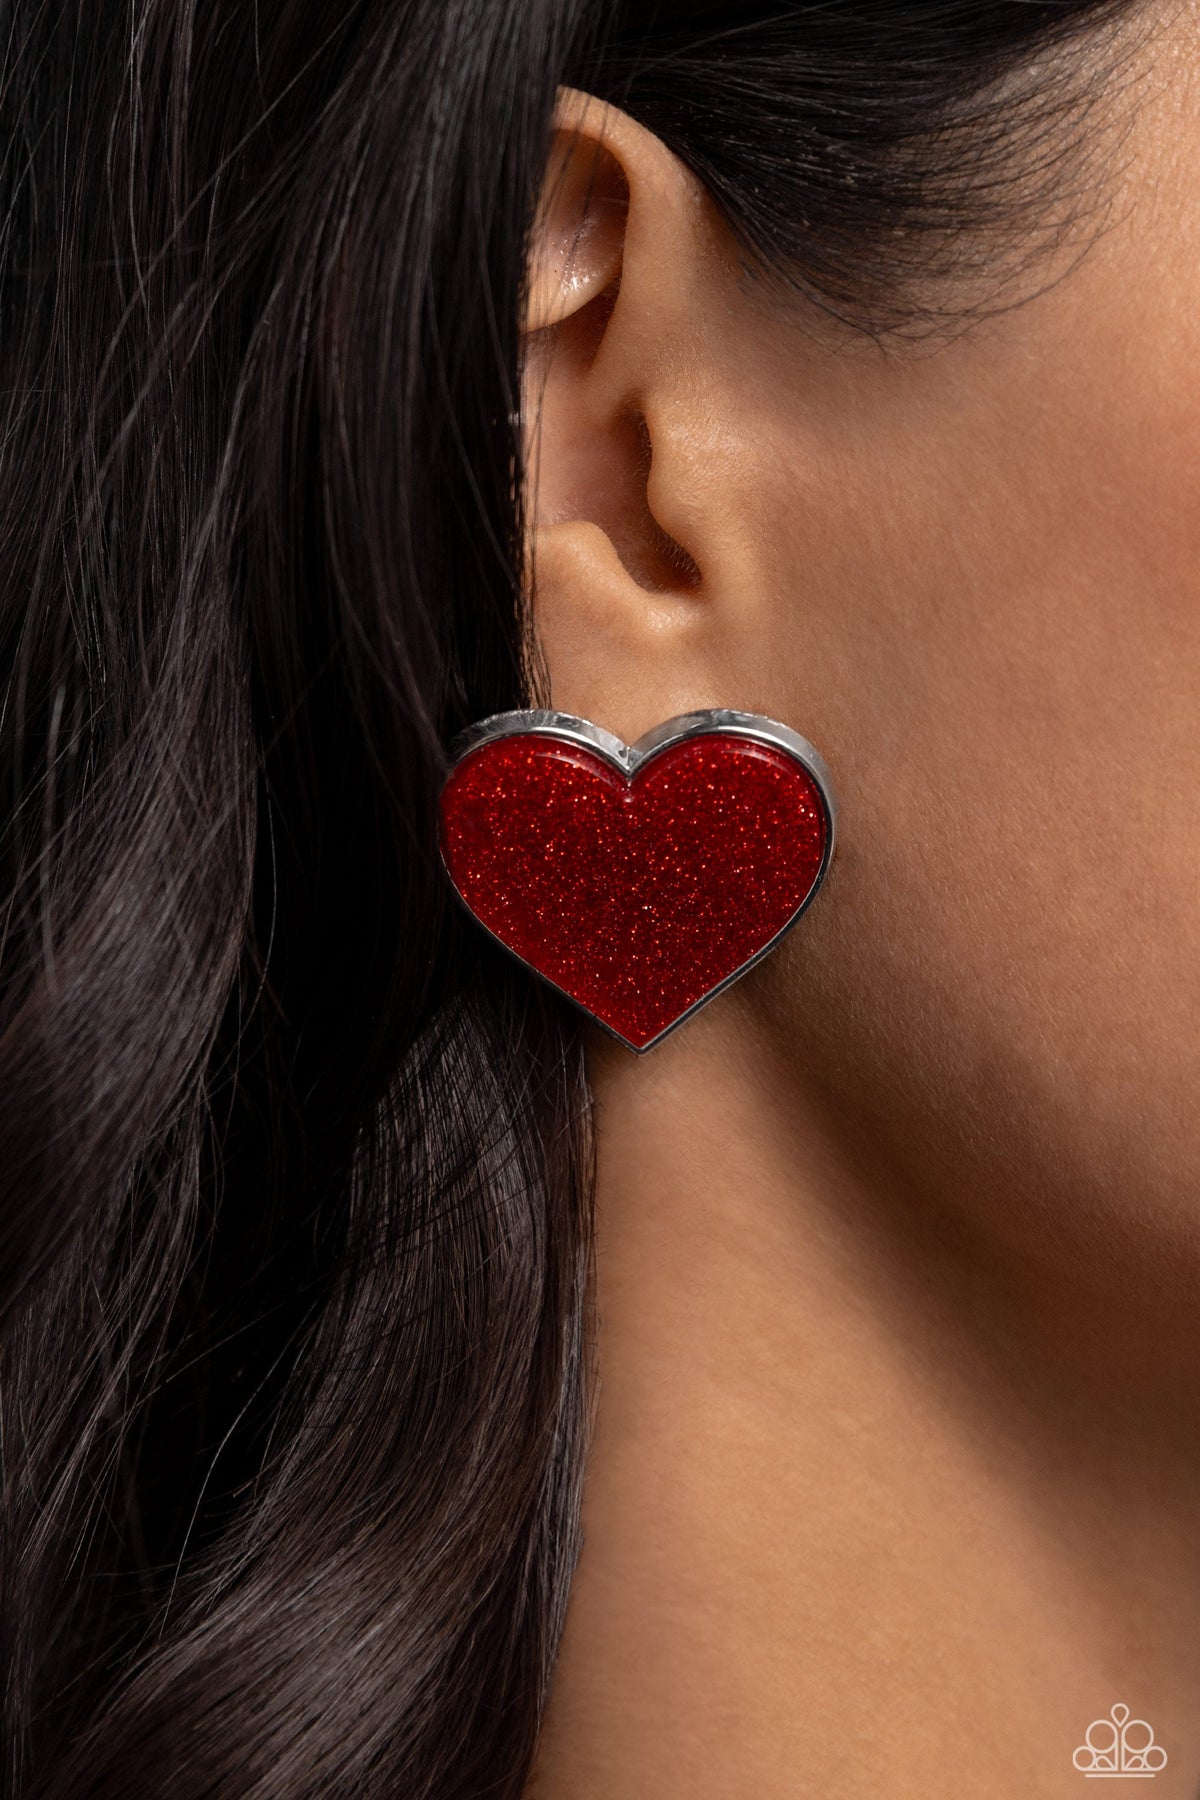 Glitter Gamble Red Heart Earrings - Paparazzi Accessories-on model - CarasShop.com - $5 Jewelry by Cara Jewels